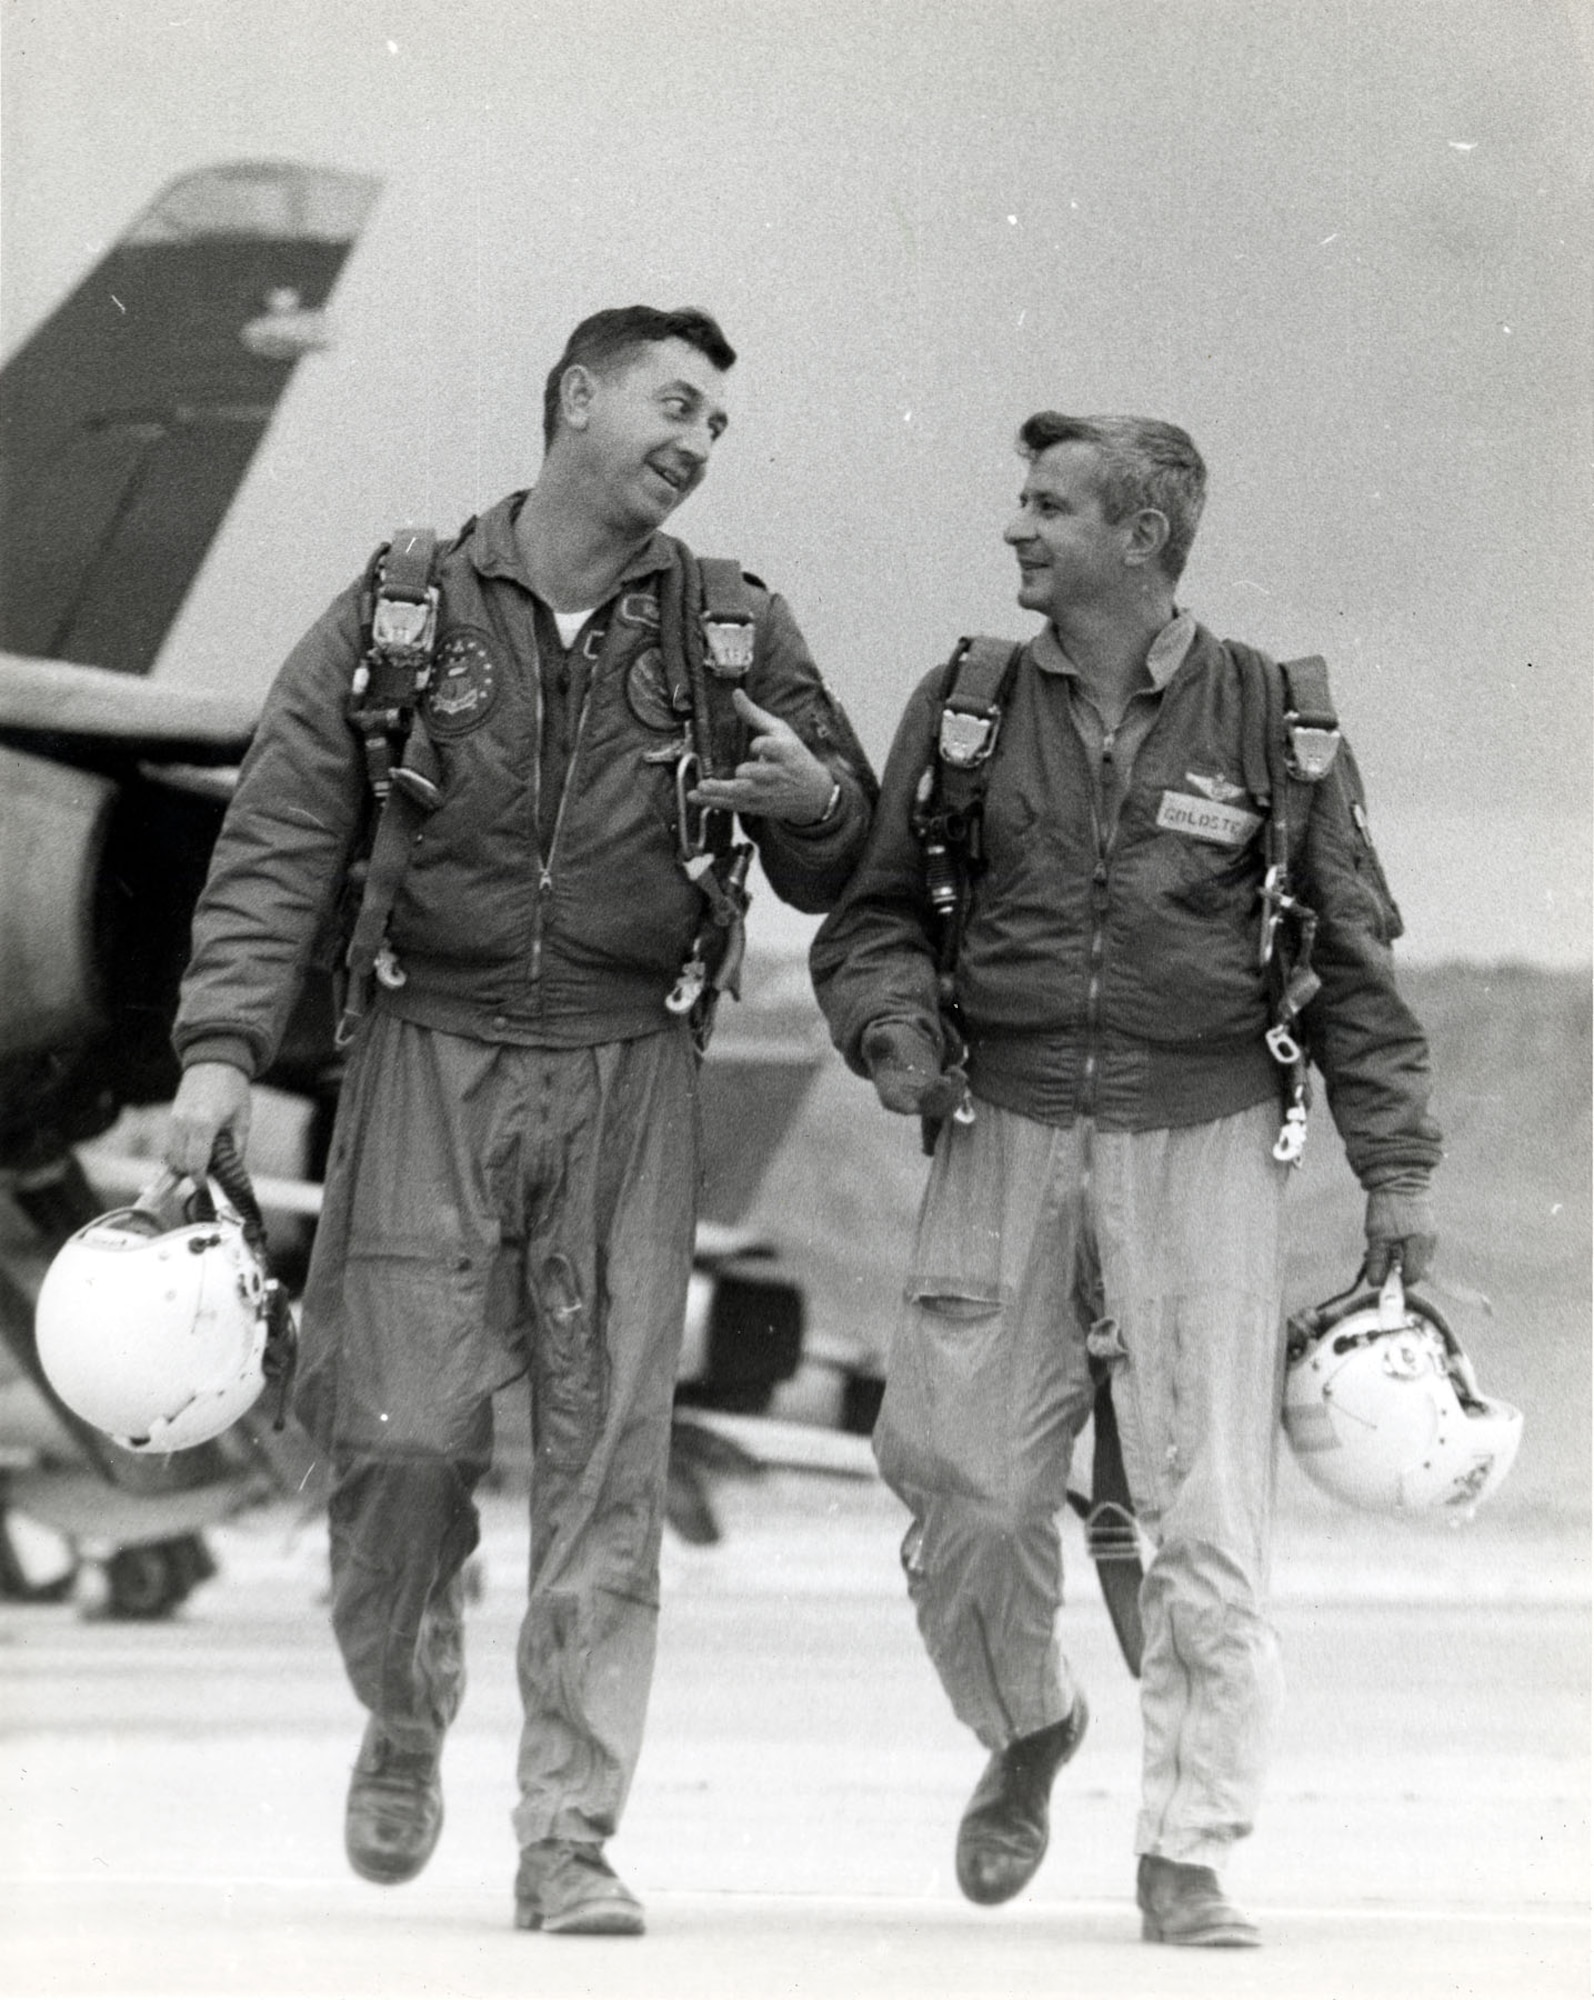 At the end of the first week, the pilots and EWOs had decided who they were going to fly with in combat. Revak and Goldstein chose to fly together because they were both from New York City—Revak was from Brooklyn and Goldstein was from the Bronx—and they were the only bachelors in their class. (U.S. Air Force photo)